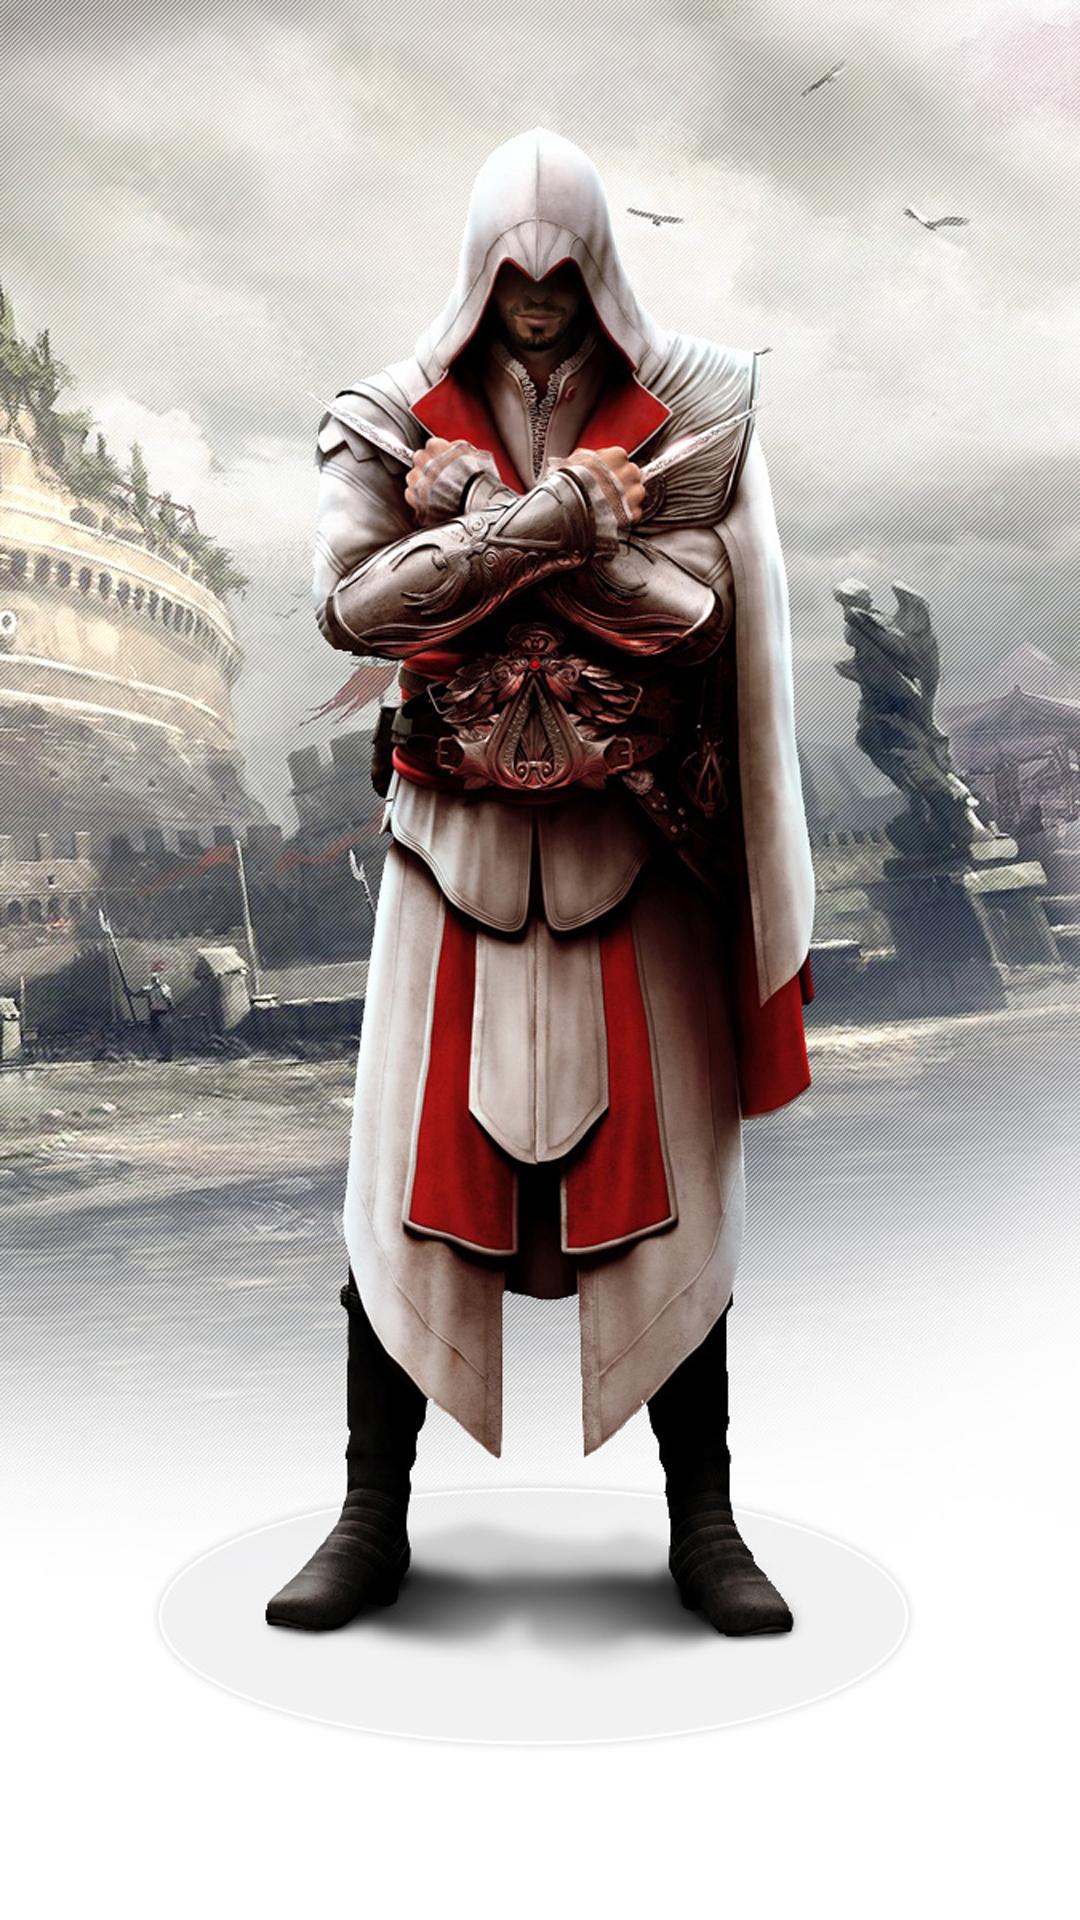 1080 x 1920 · jpeg - Assassins creed htc one 1080x1920 - Best htc one wallpapers